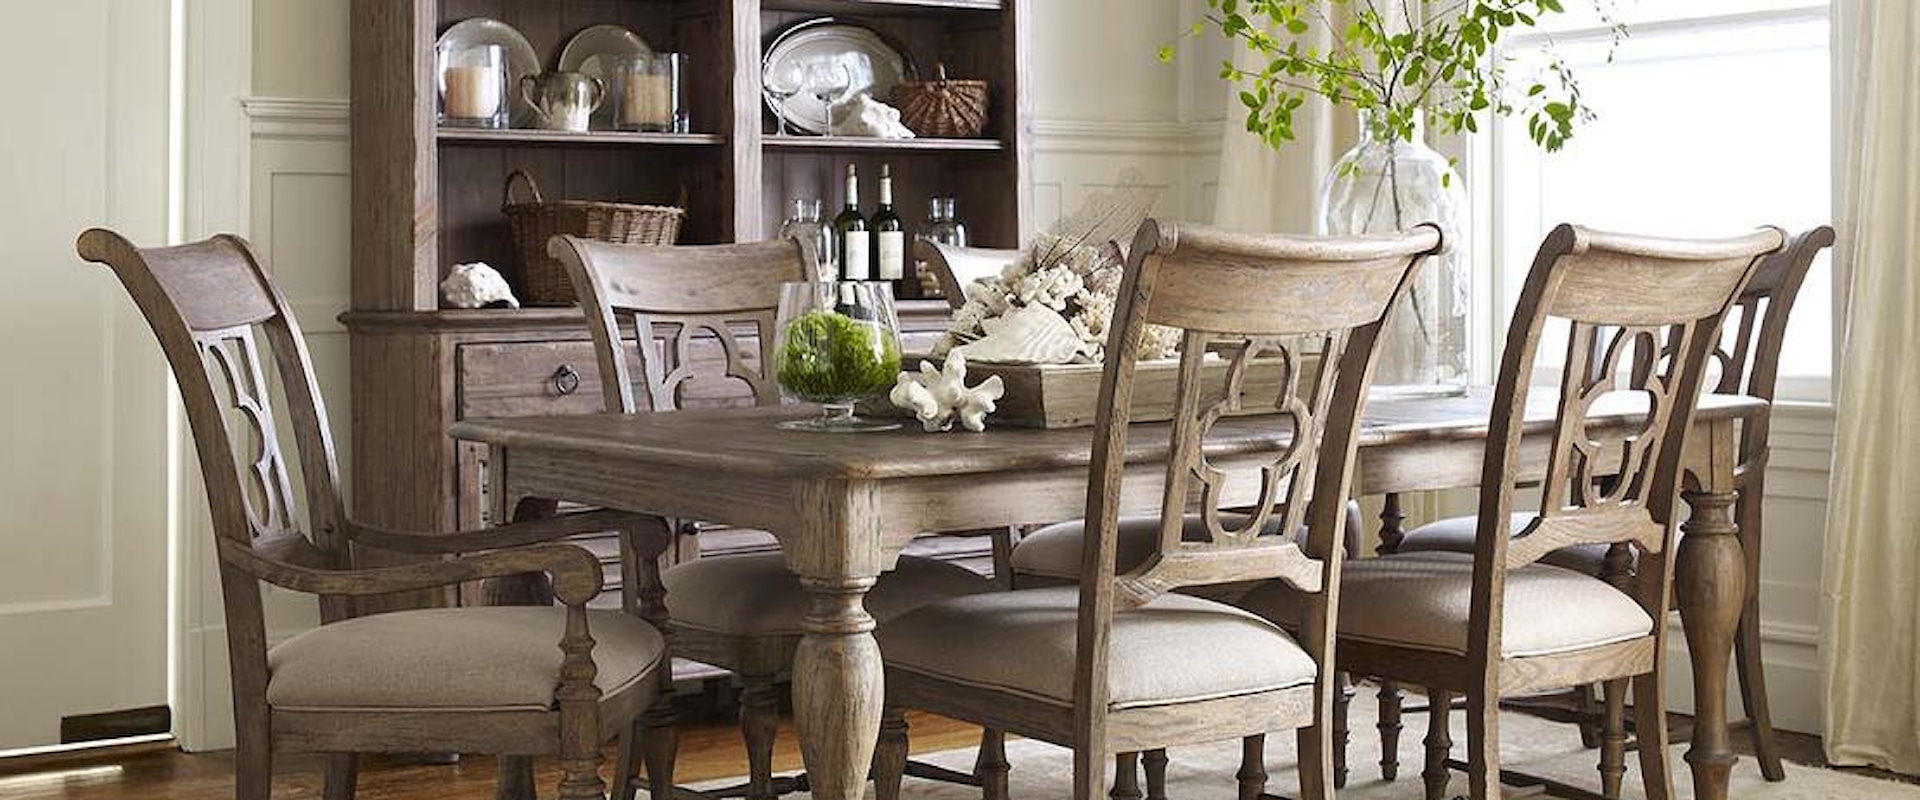 7 Piece Dining Set with Canterbury Table and Quatrefoil Back Chairs